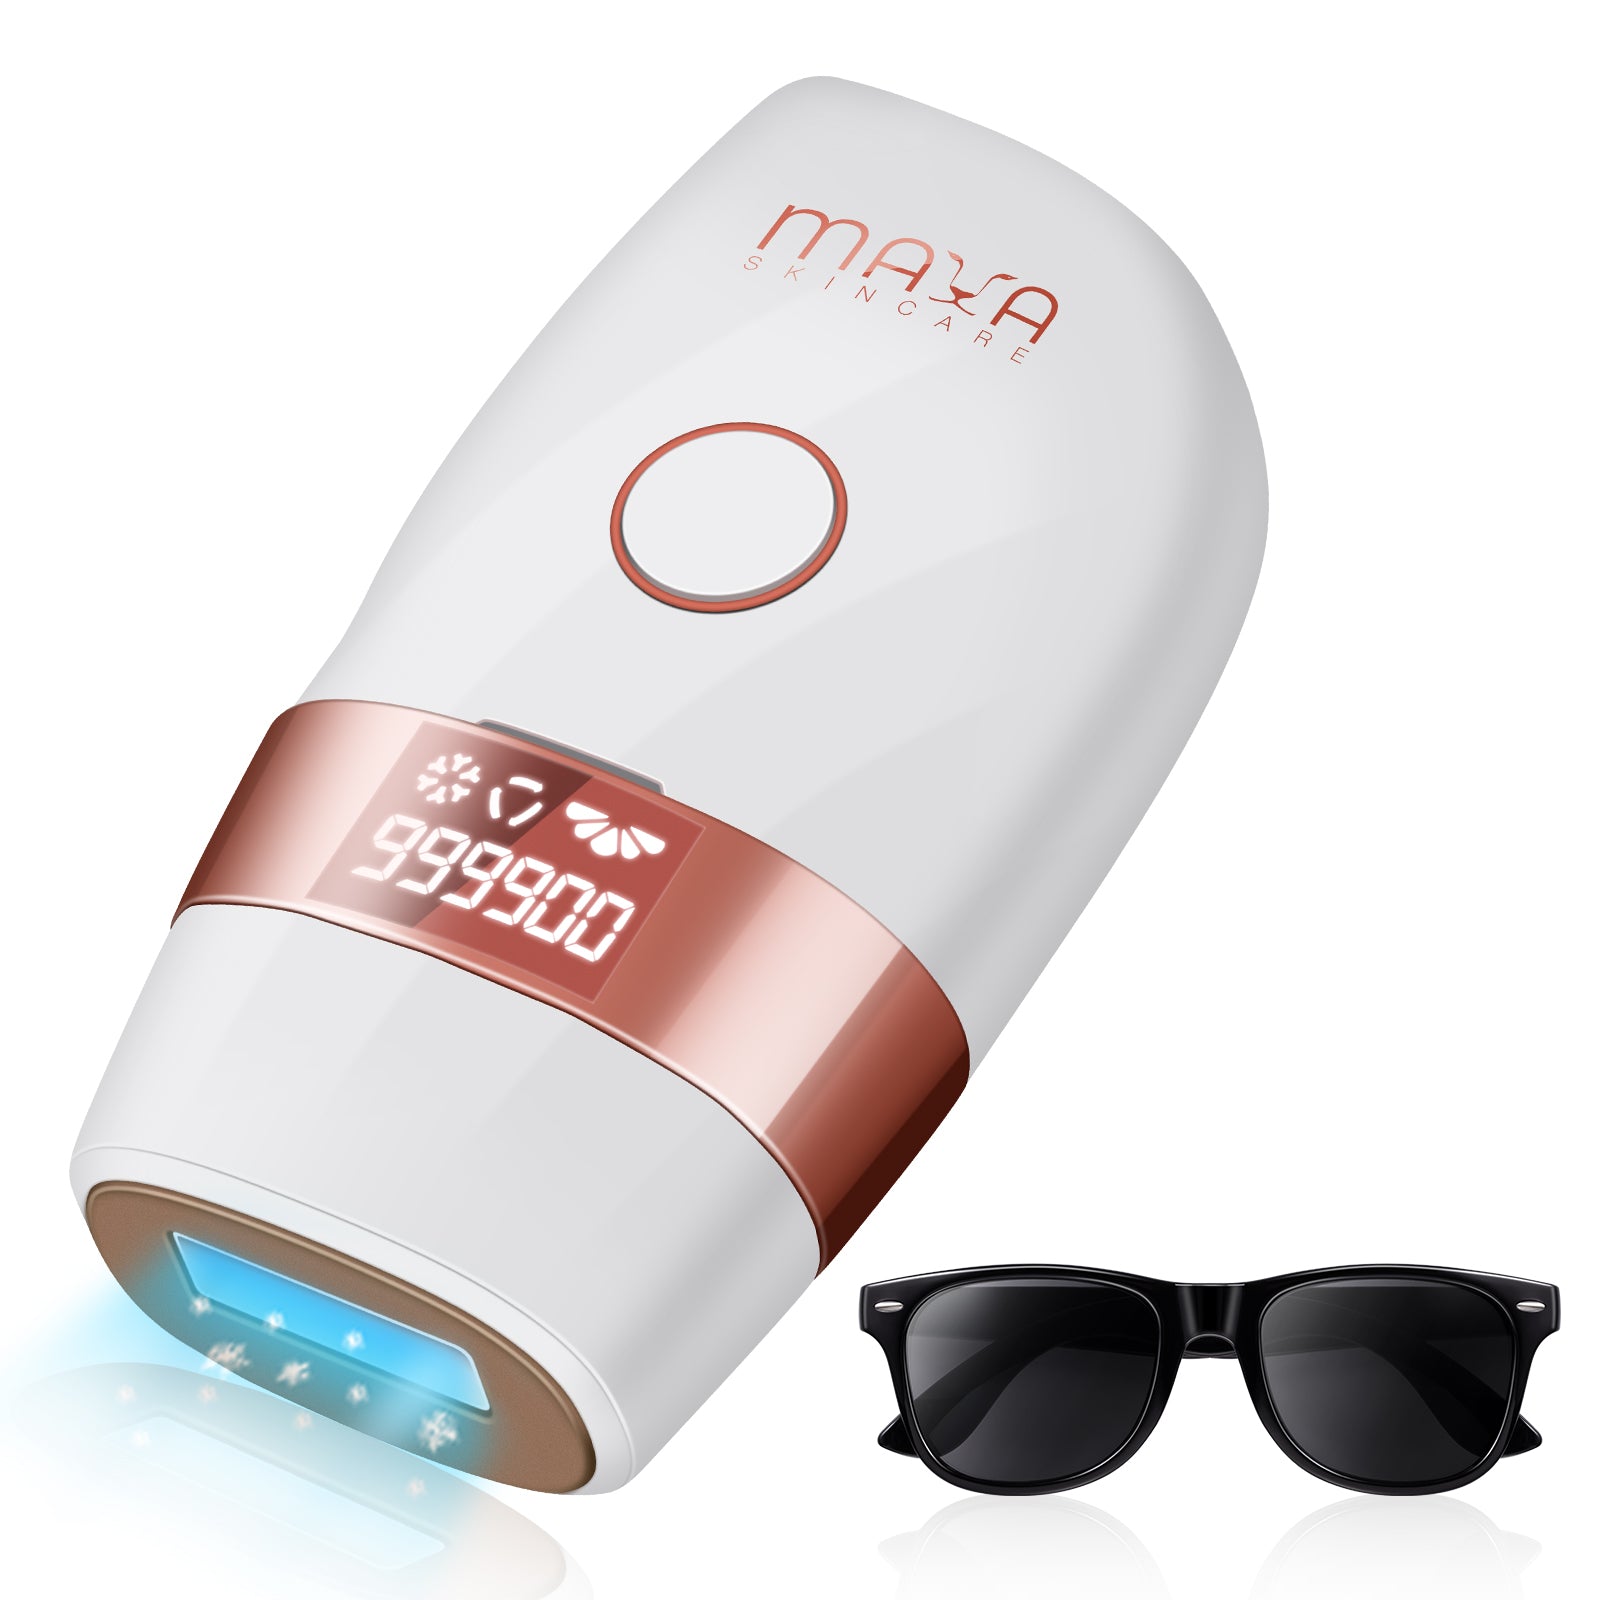 Ice Cool Premium at Home IPL Hair Removal Device